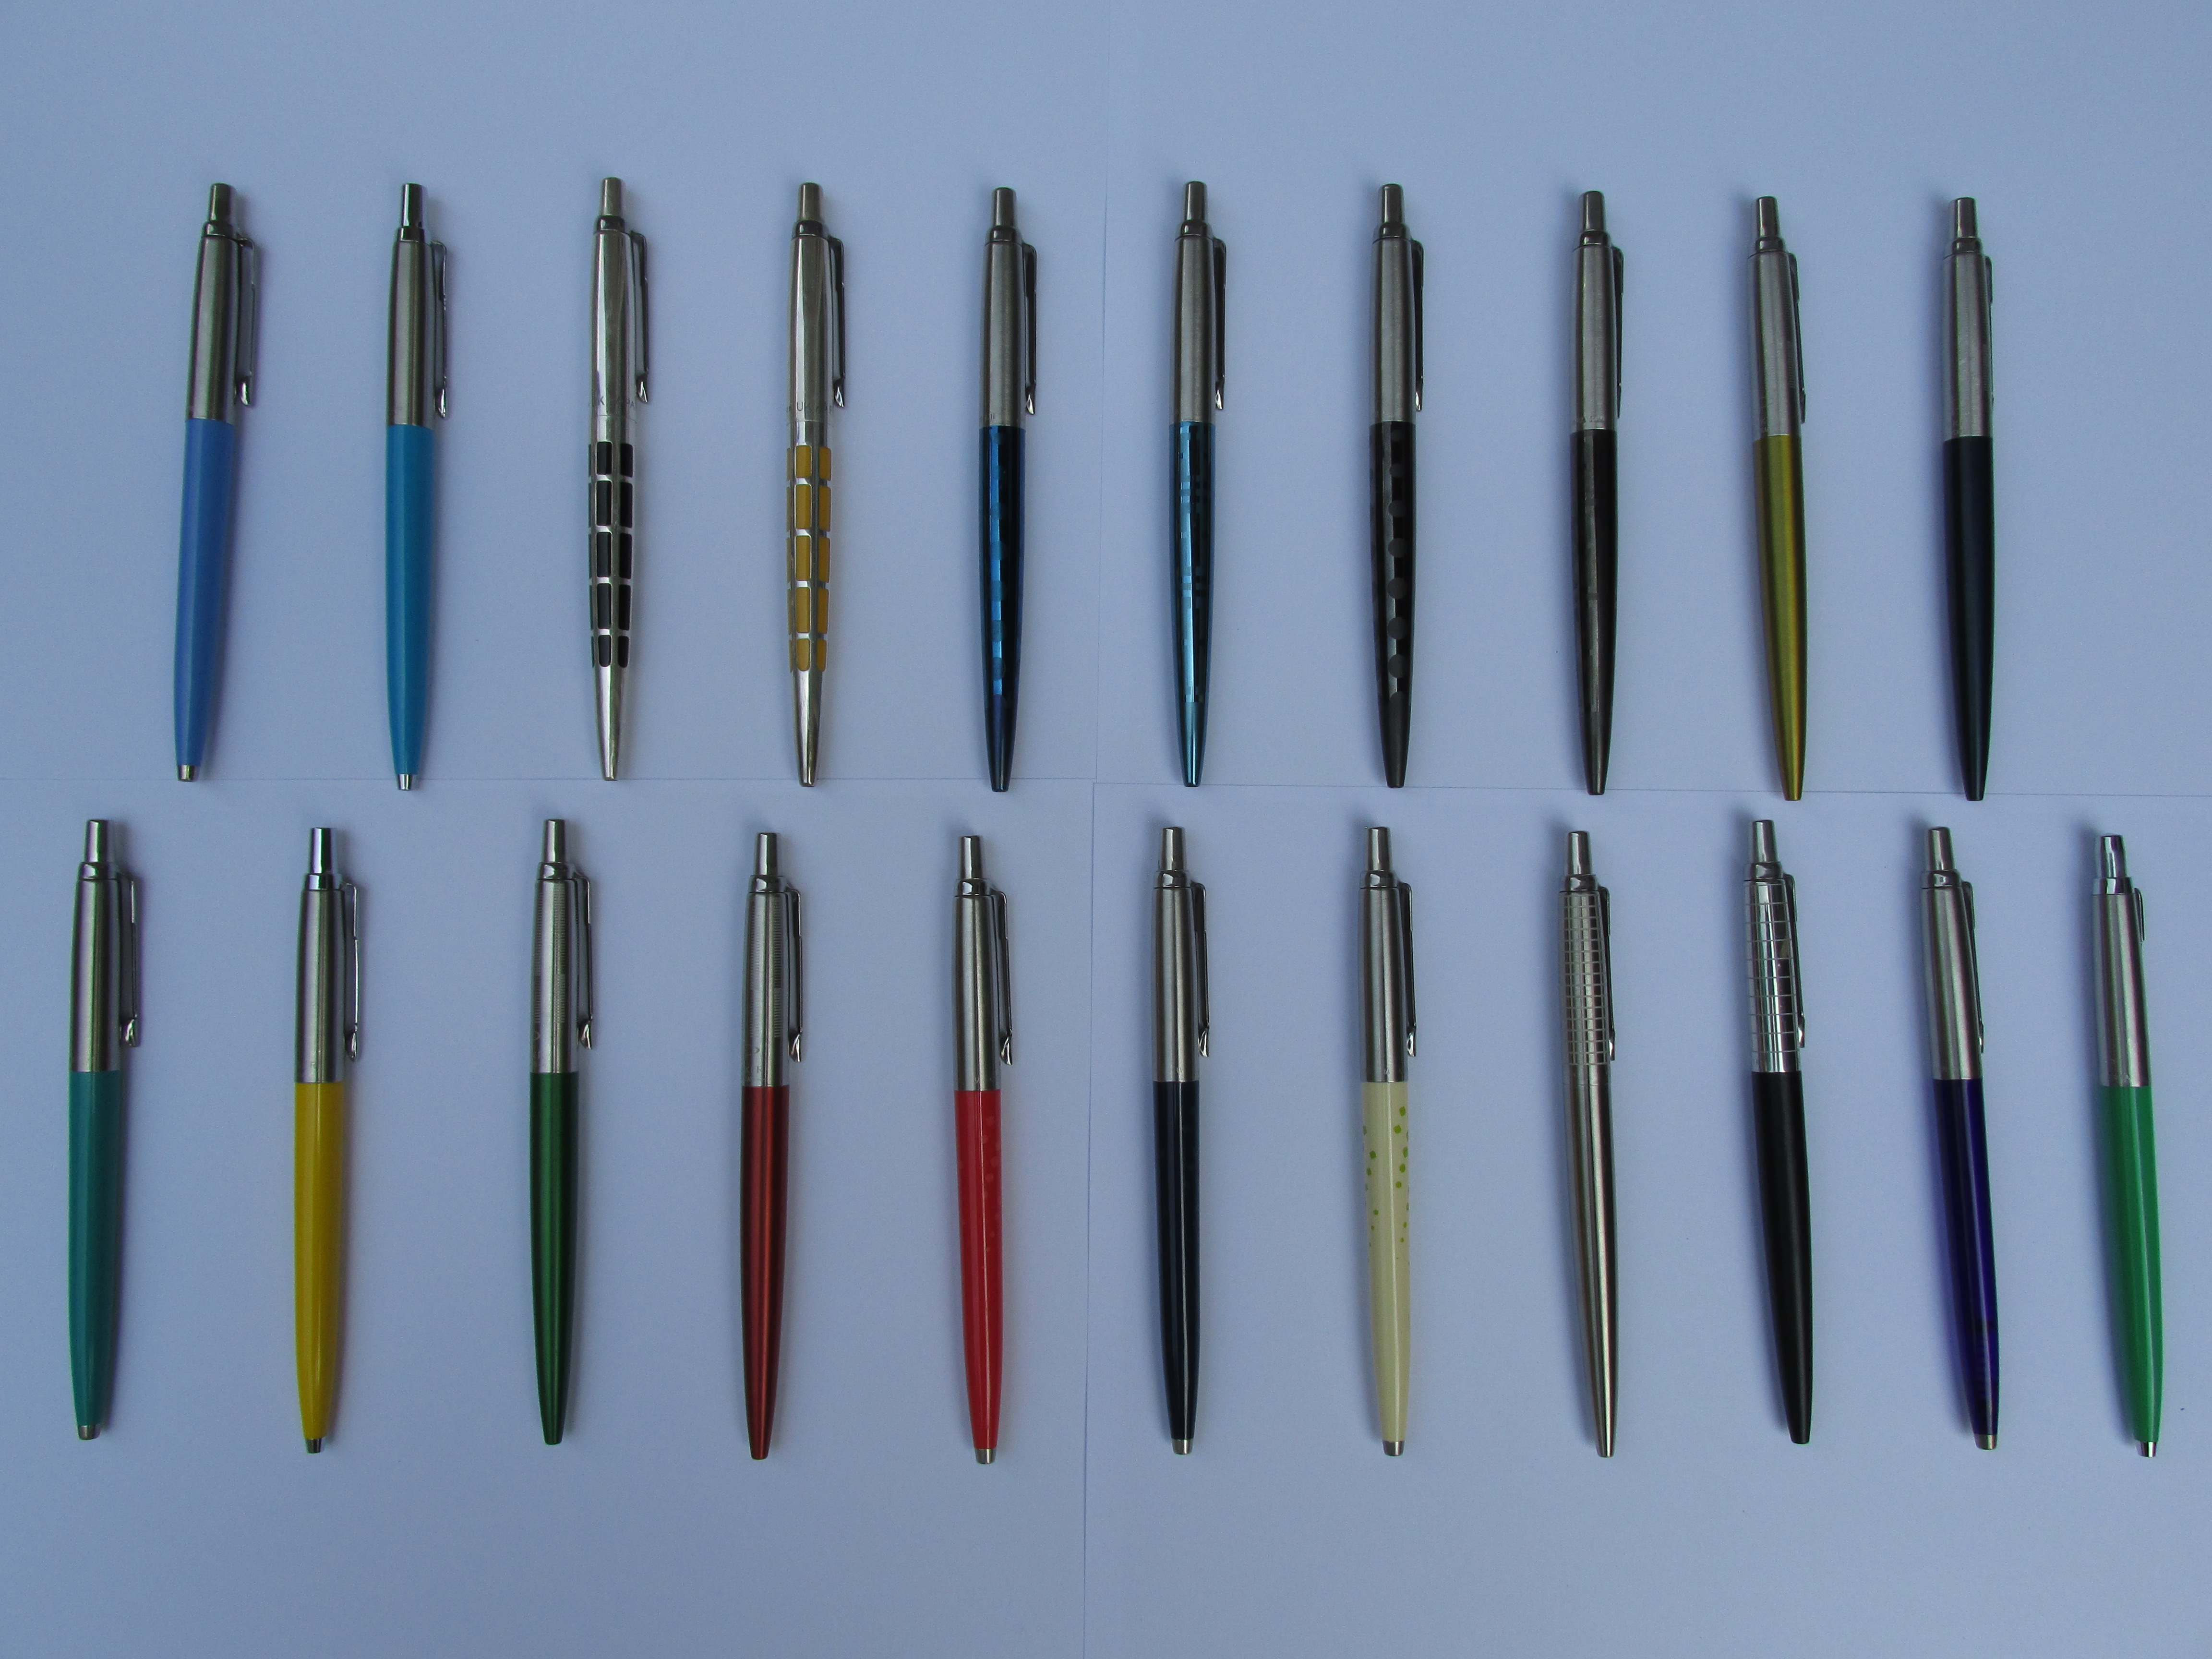 Jotter Pens Collection